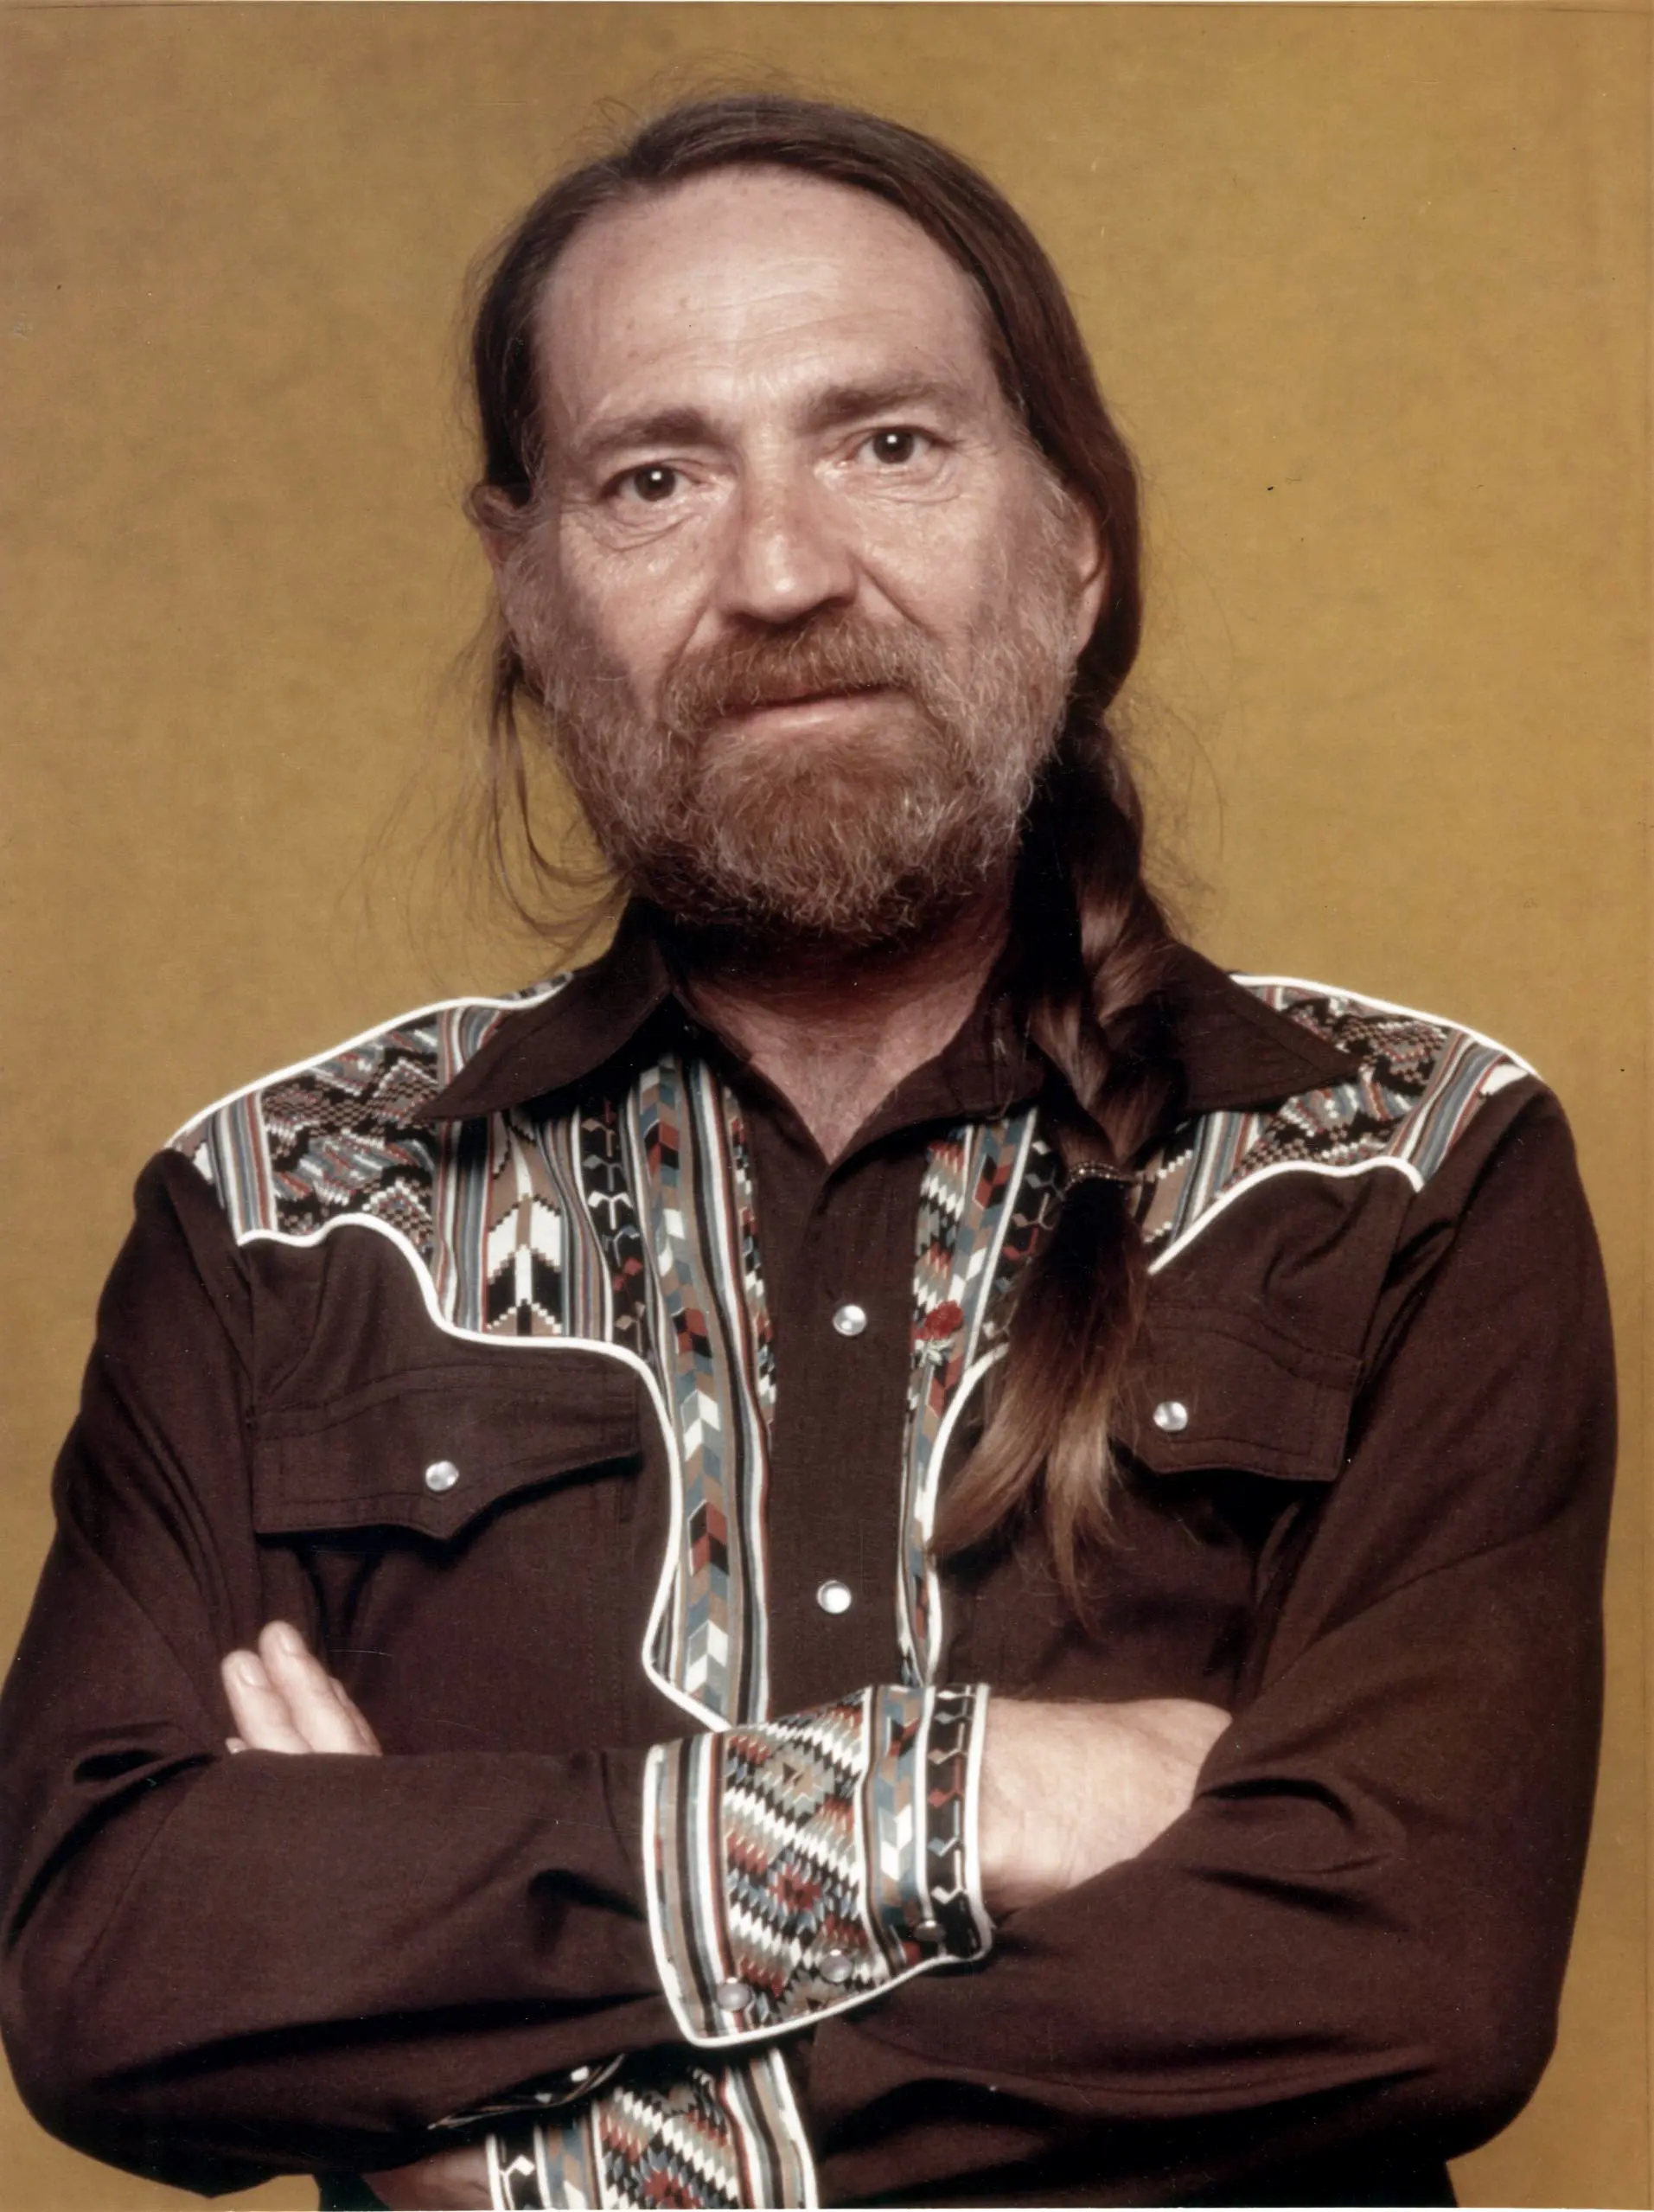 17th ANNUAL COUNTRY MUSIC ASSOCIATION AWARDS, host Willie Nelson